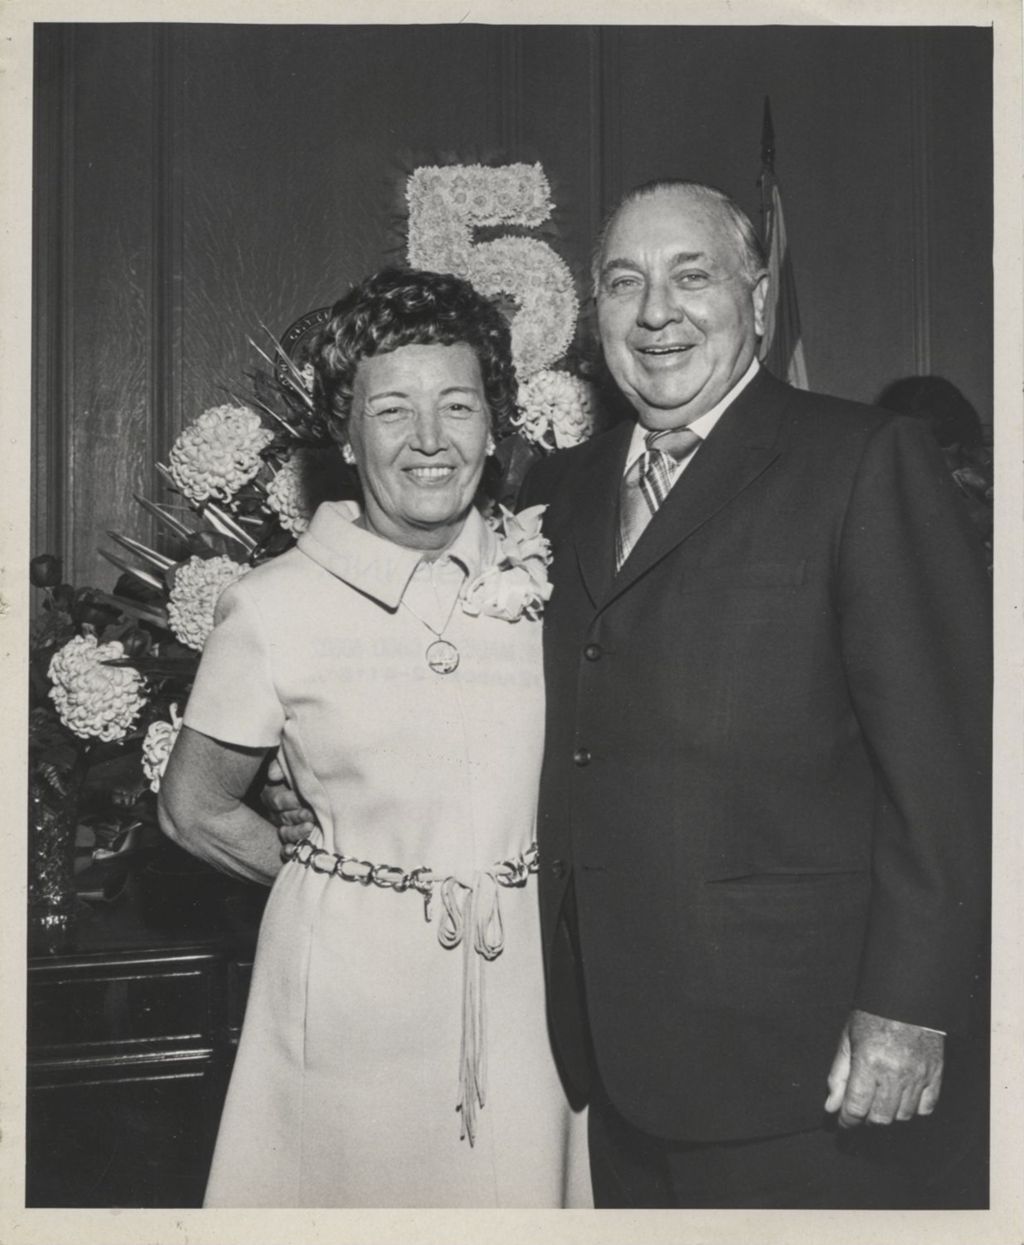 Fifth mayoral inauguration, Eleanor and Richard J. Daley with floral display